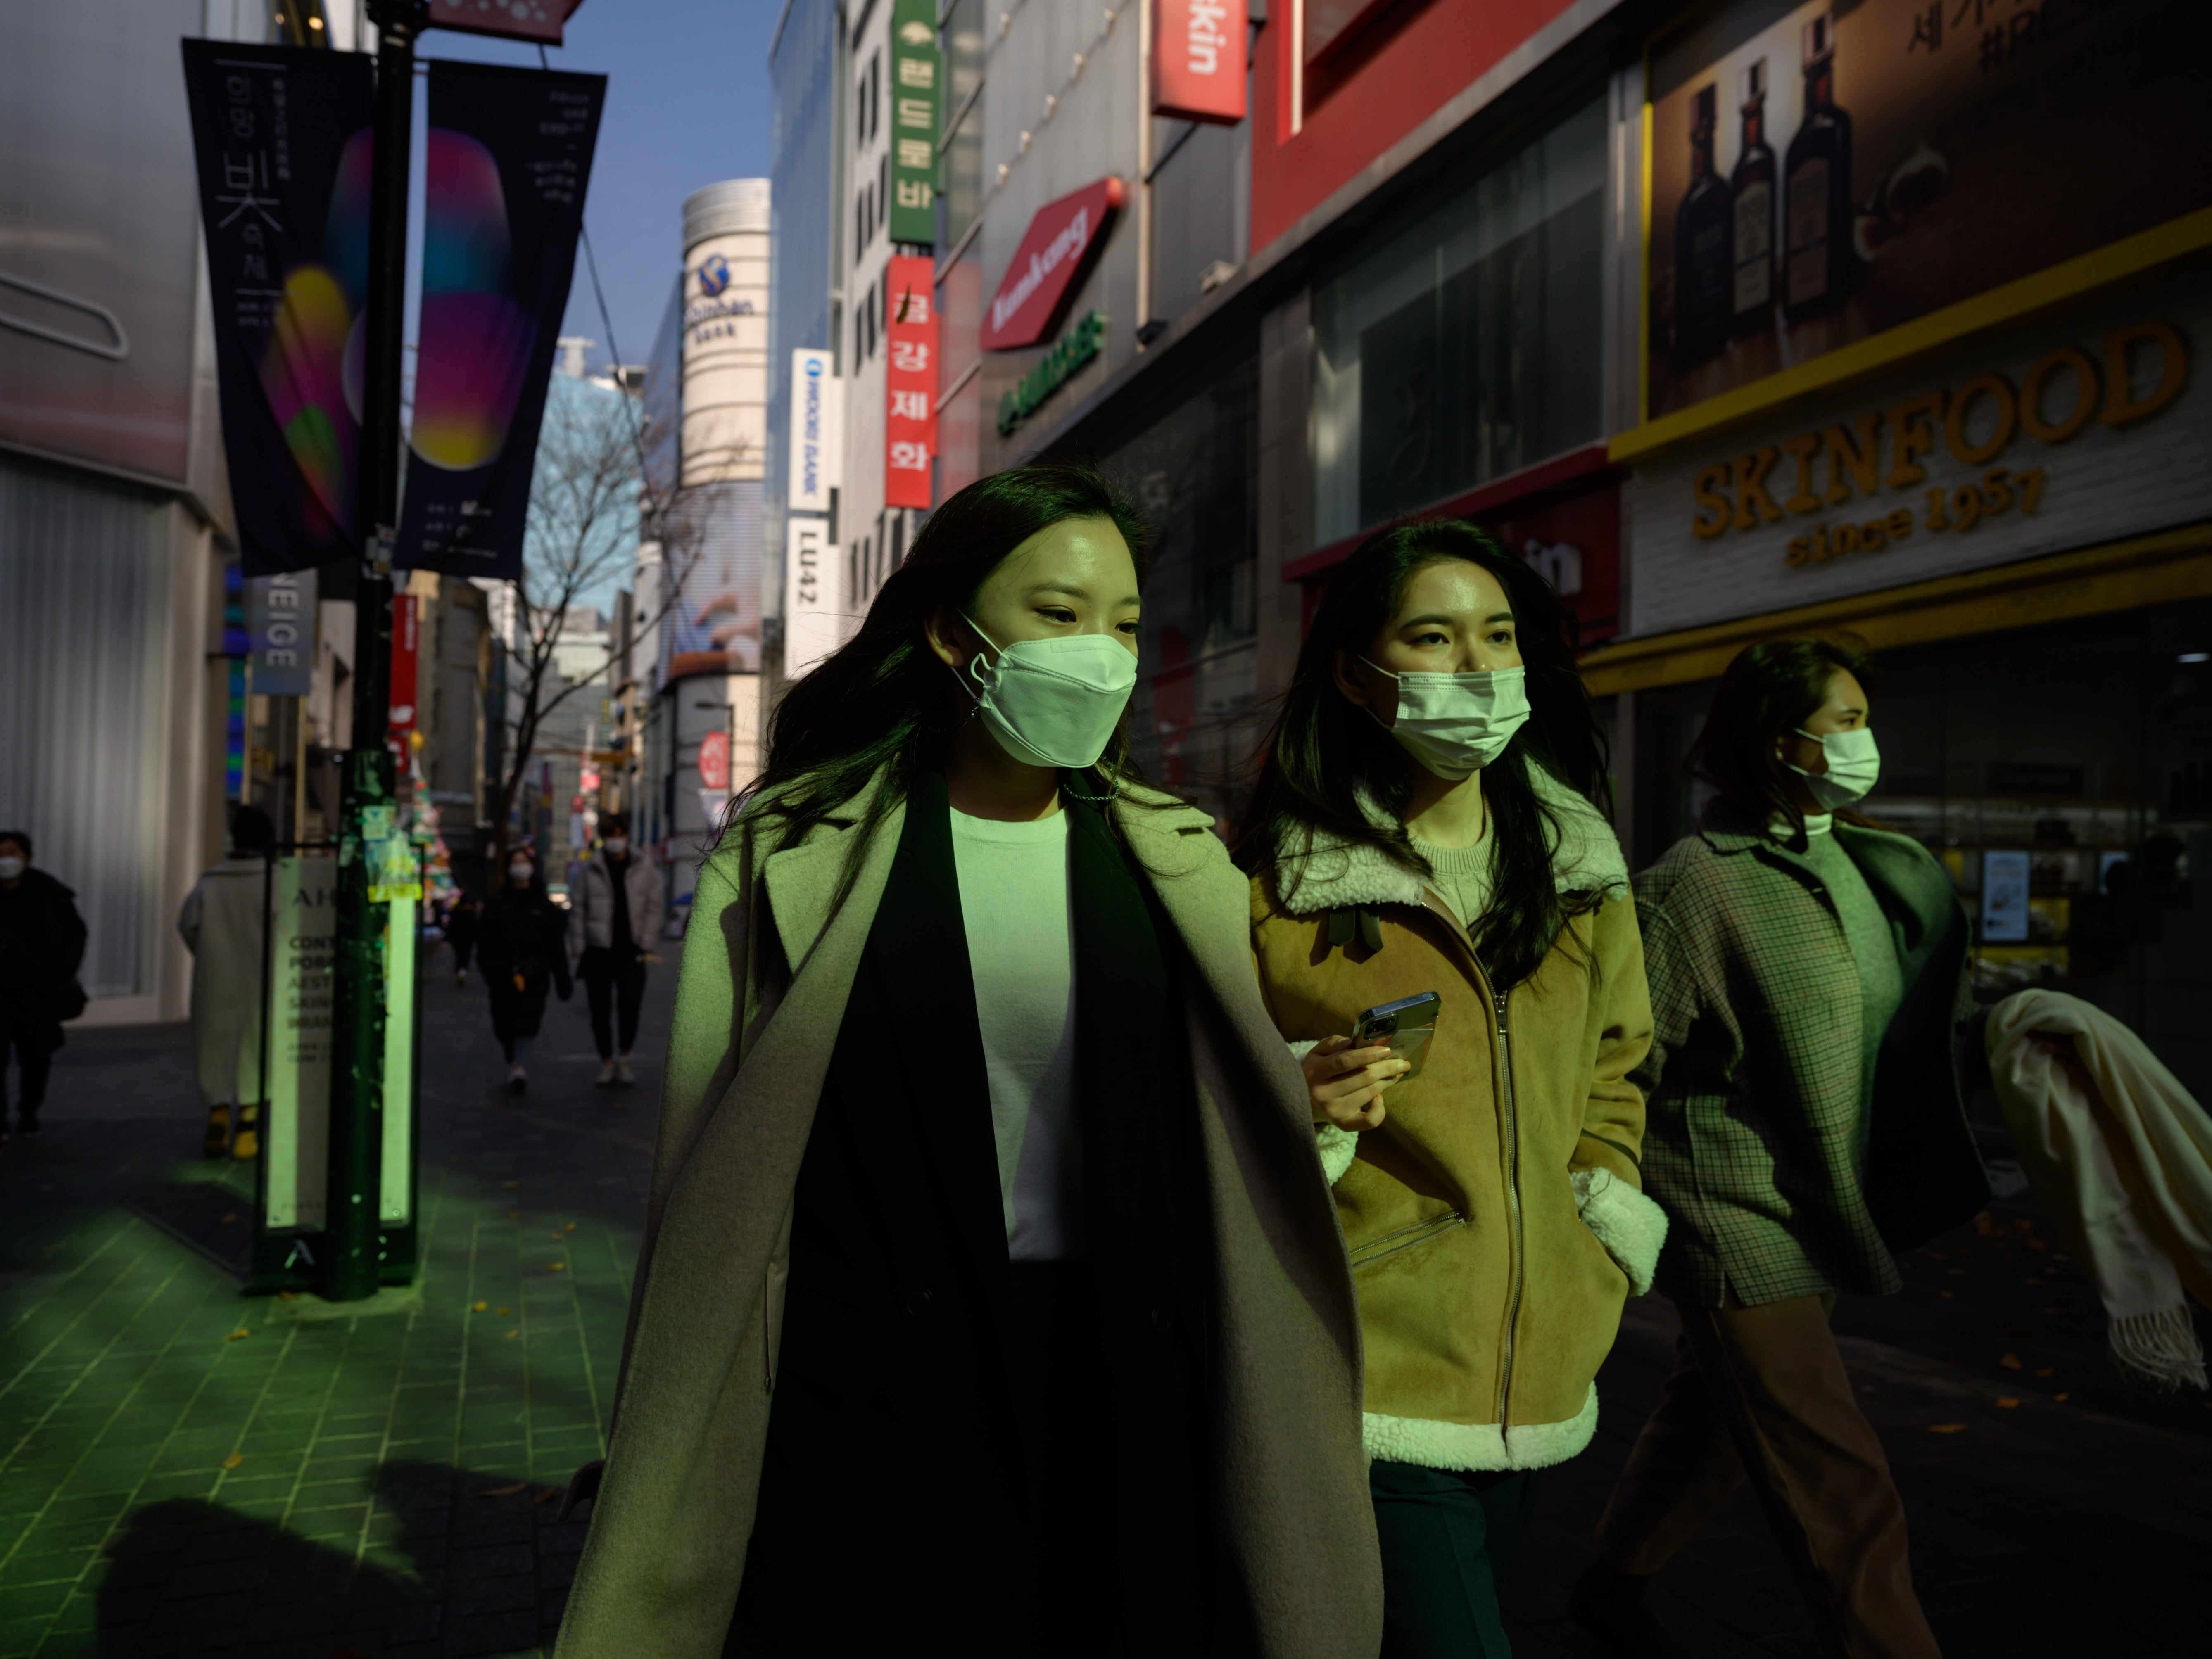 Shoppers wearing face masks walk through the Myeongdong shopping district of Seoul on November 26, 2020